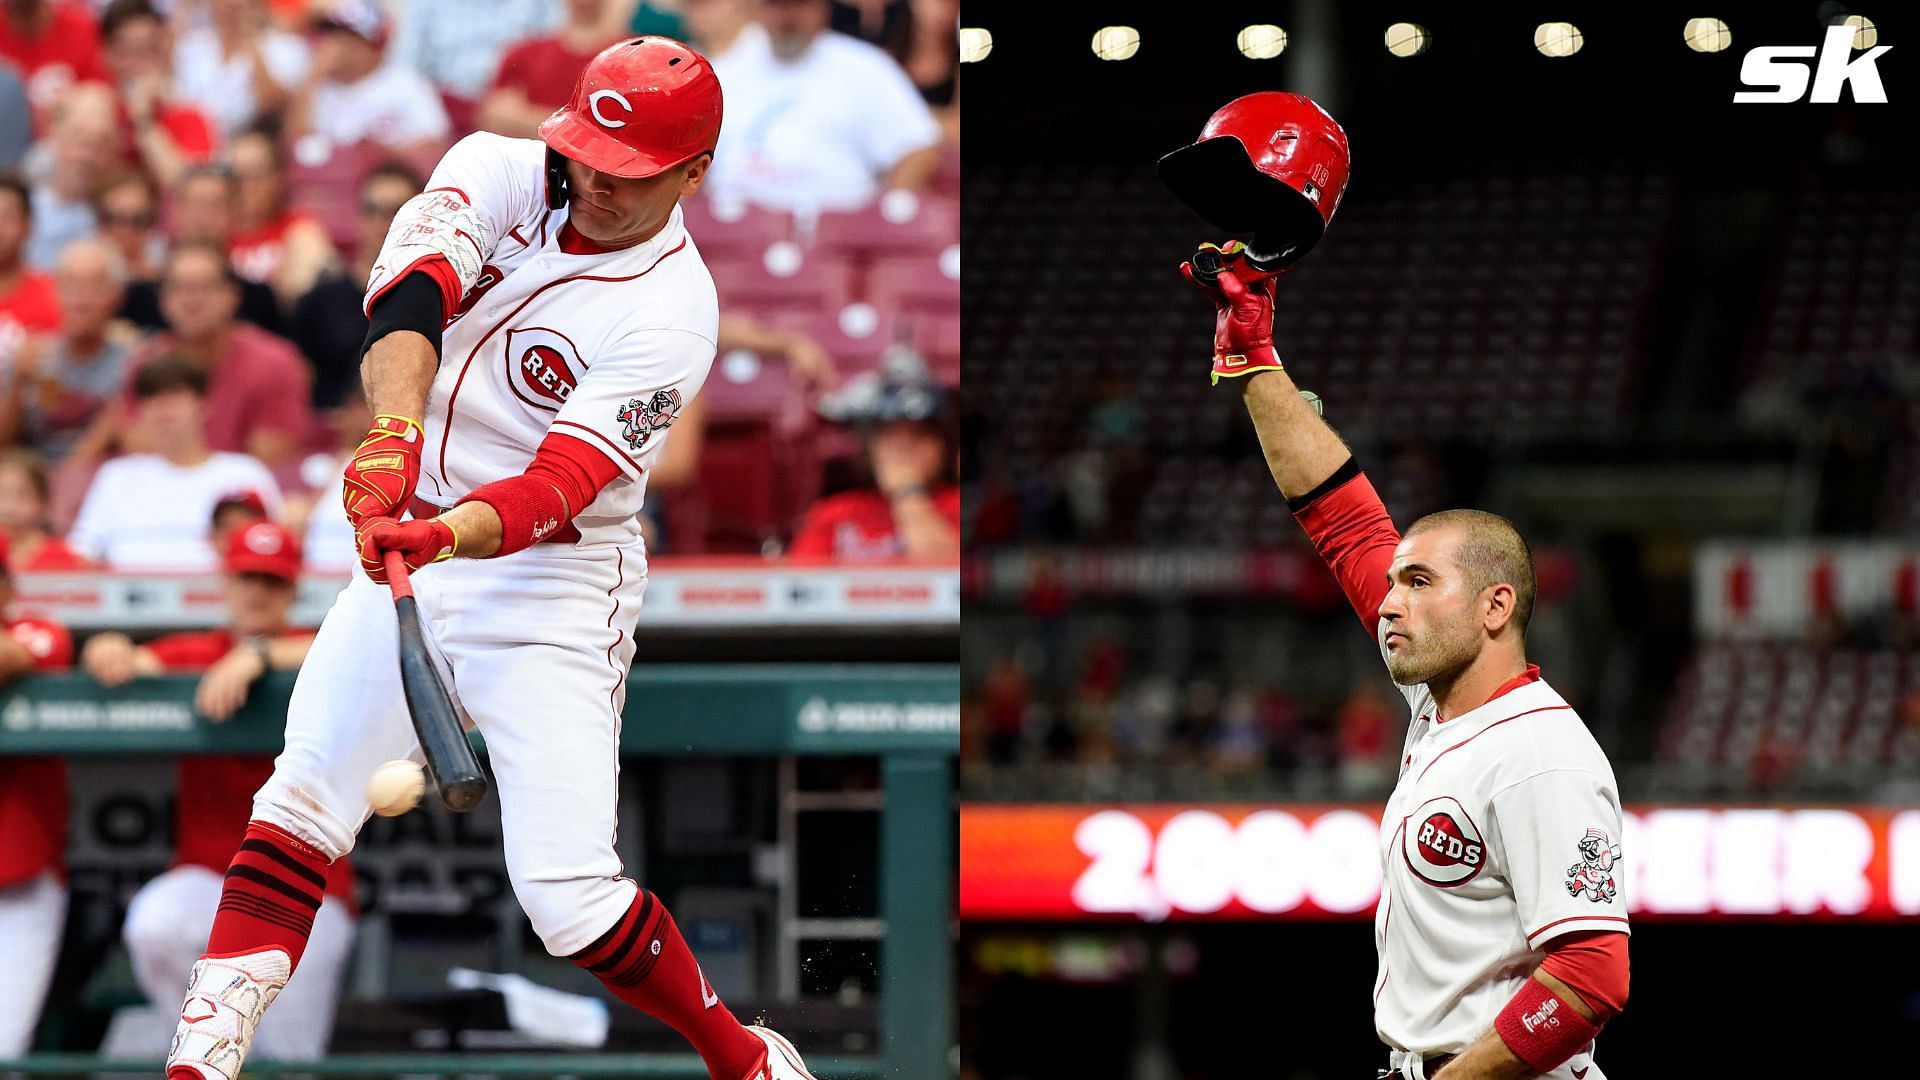 Joey Votto believes he has plenty left in the tank despite shoulder surgery after signing for hometown team Blue Jays